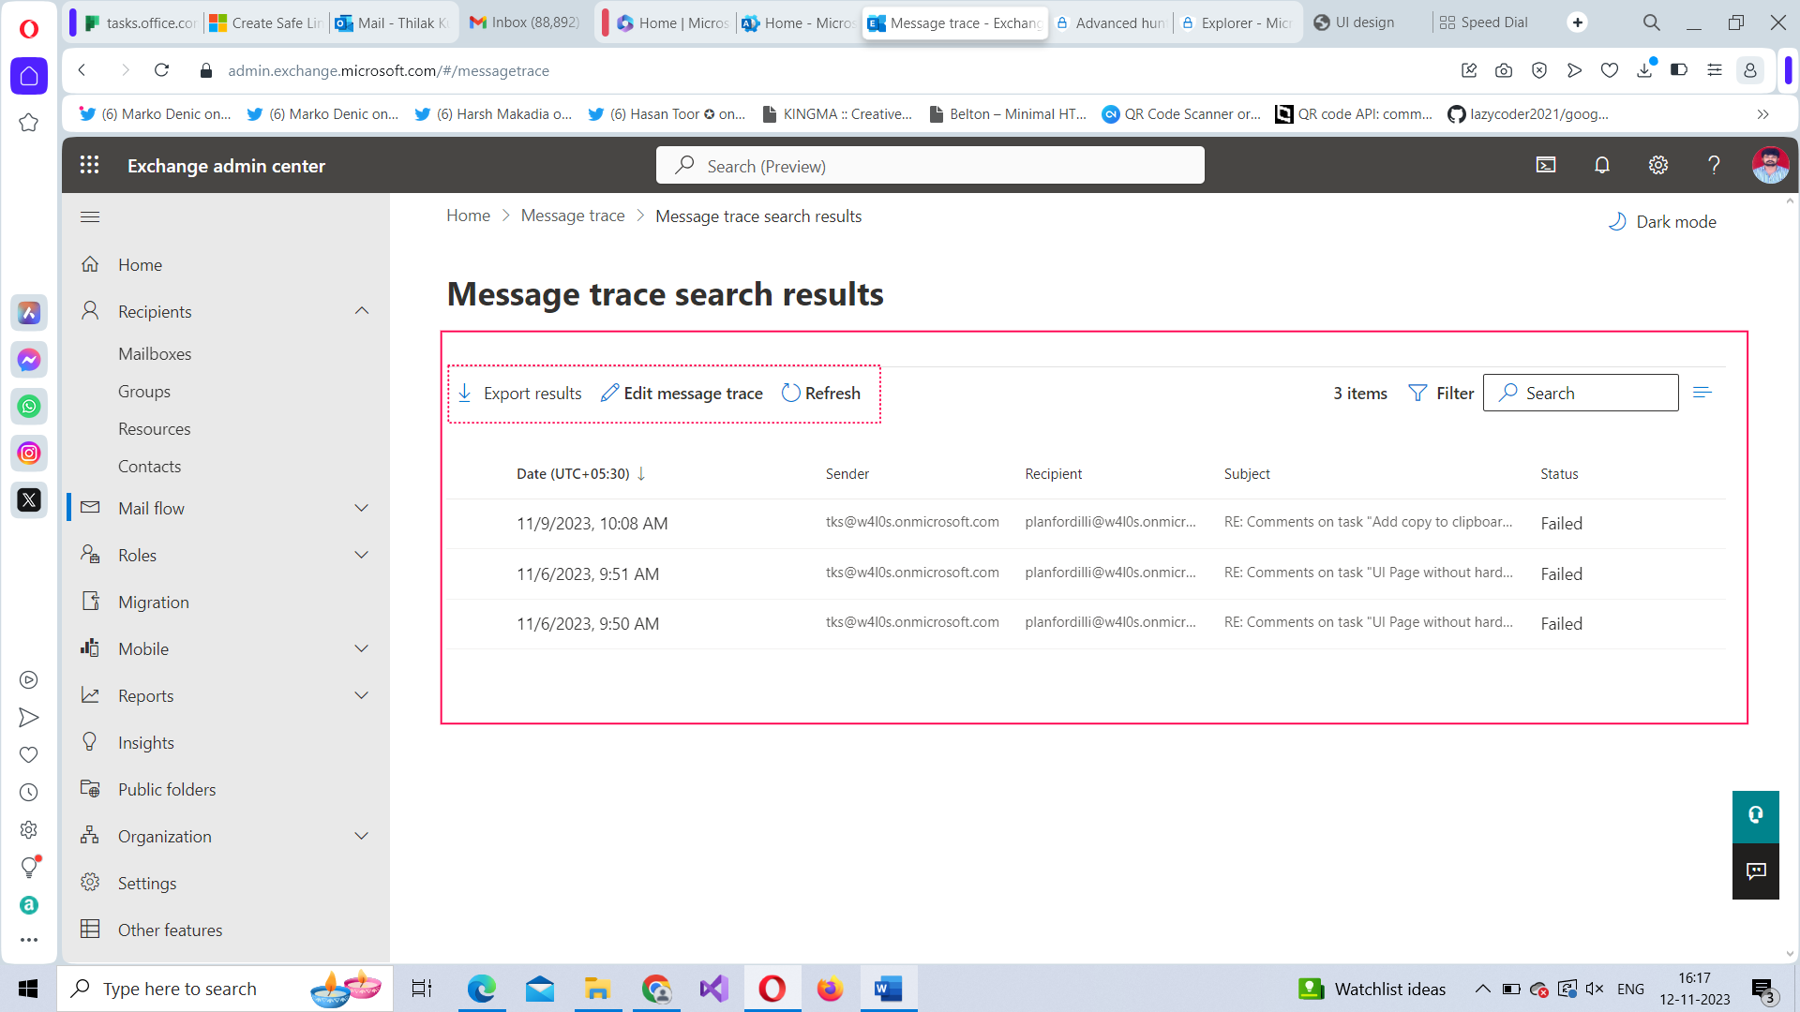 This screenshot shows message trace search results.